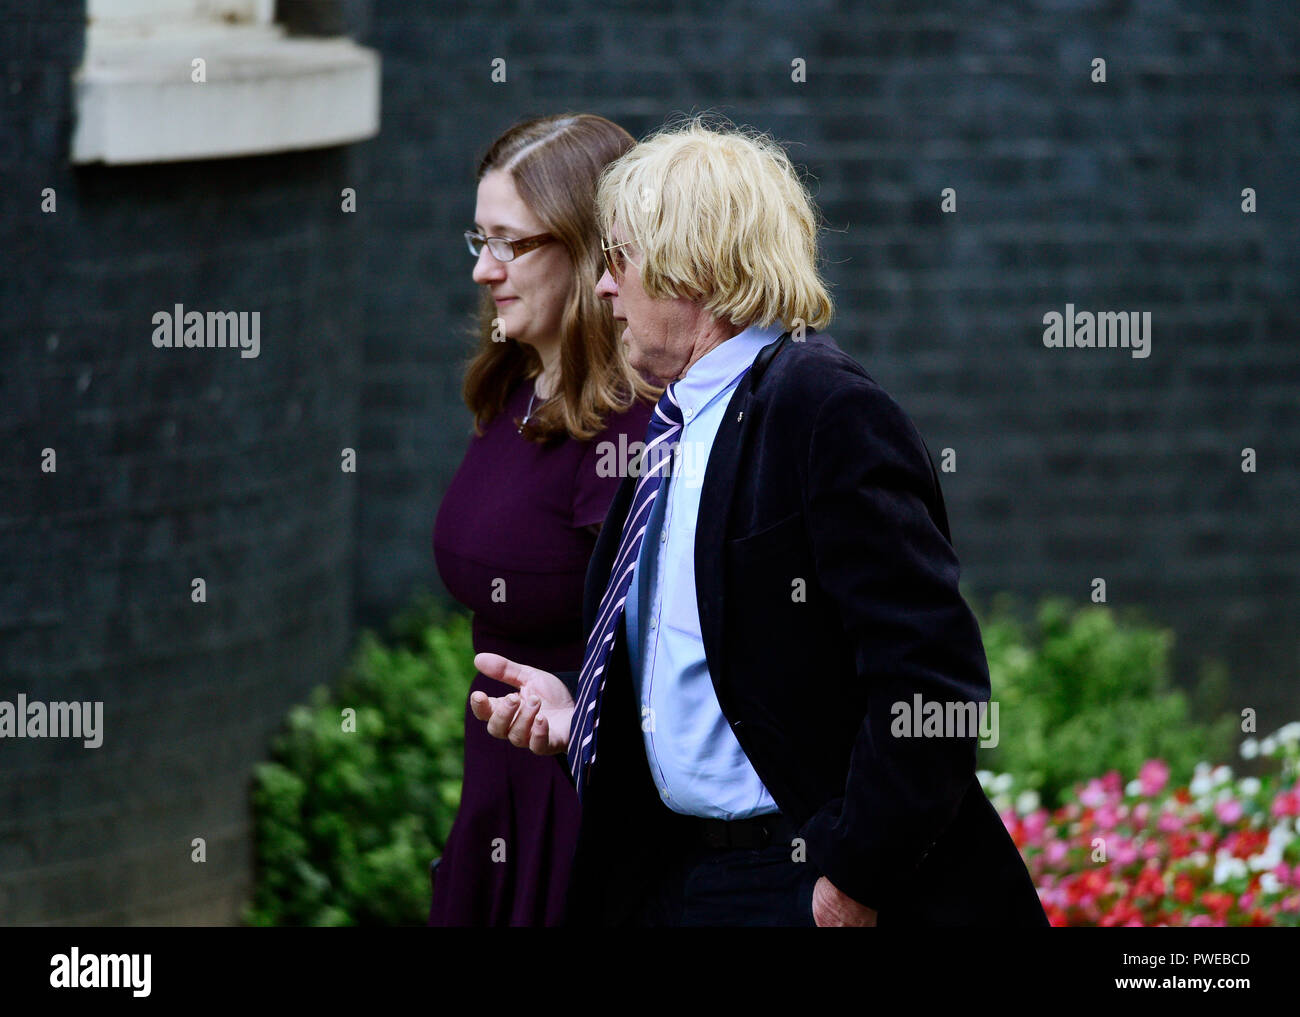 Downing Street, London, UK. 16 October 2018. A steady stream of Conservative MPs and Peers arrive and leave Downing Street for an extended cabinet meeting where Brexit backstop decision is being discussed. Image: MP Michael Fabricant arriving with colleague. Credit: Malcolm Park/Alamy Live News. Stock Photo